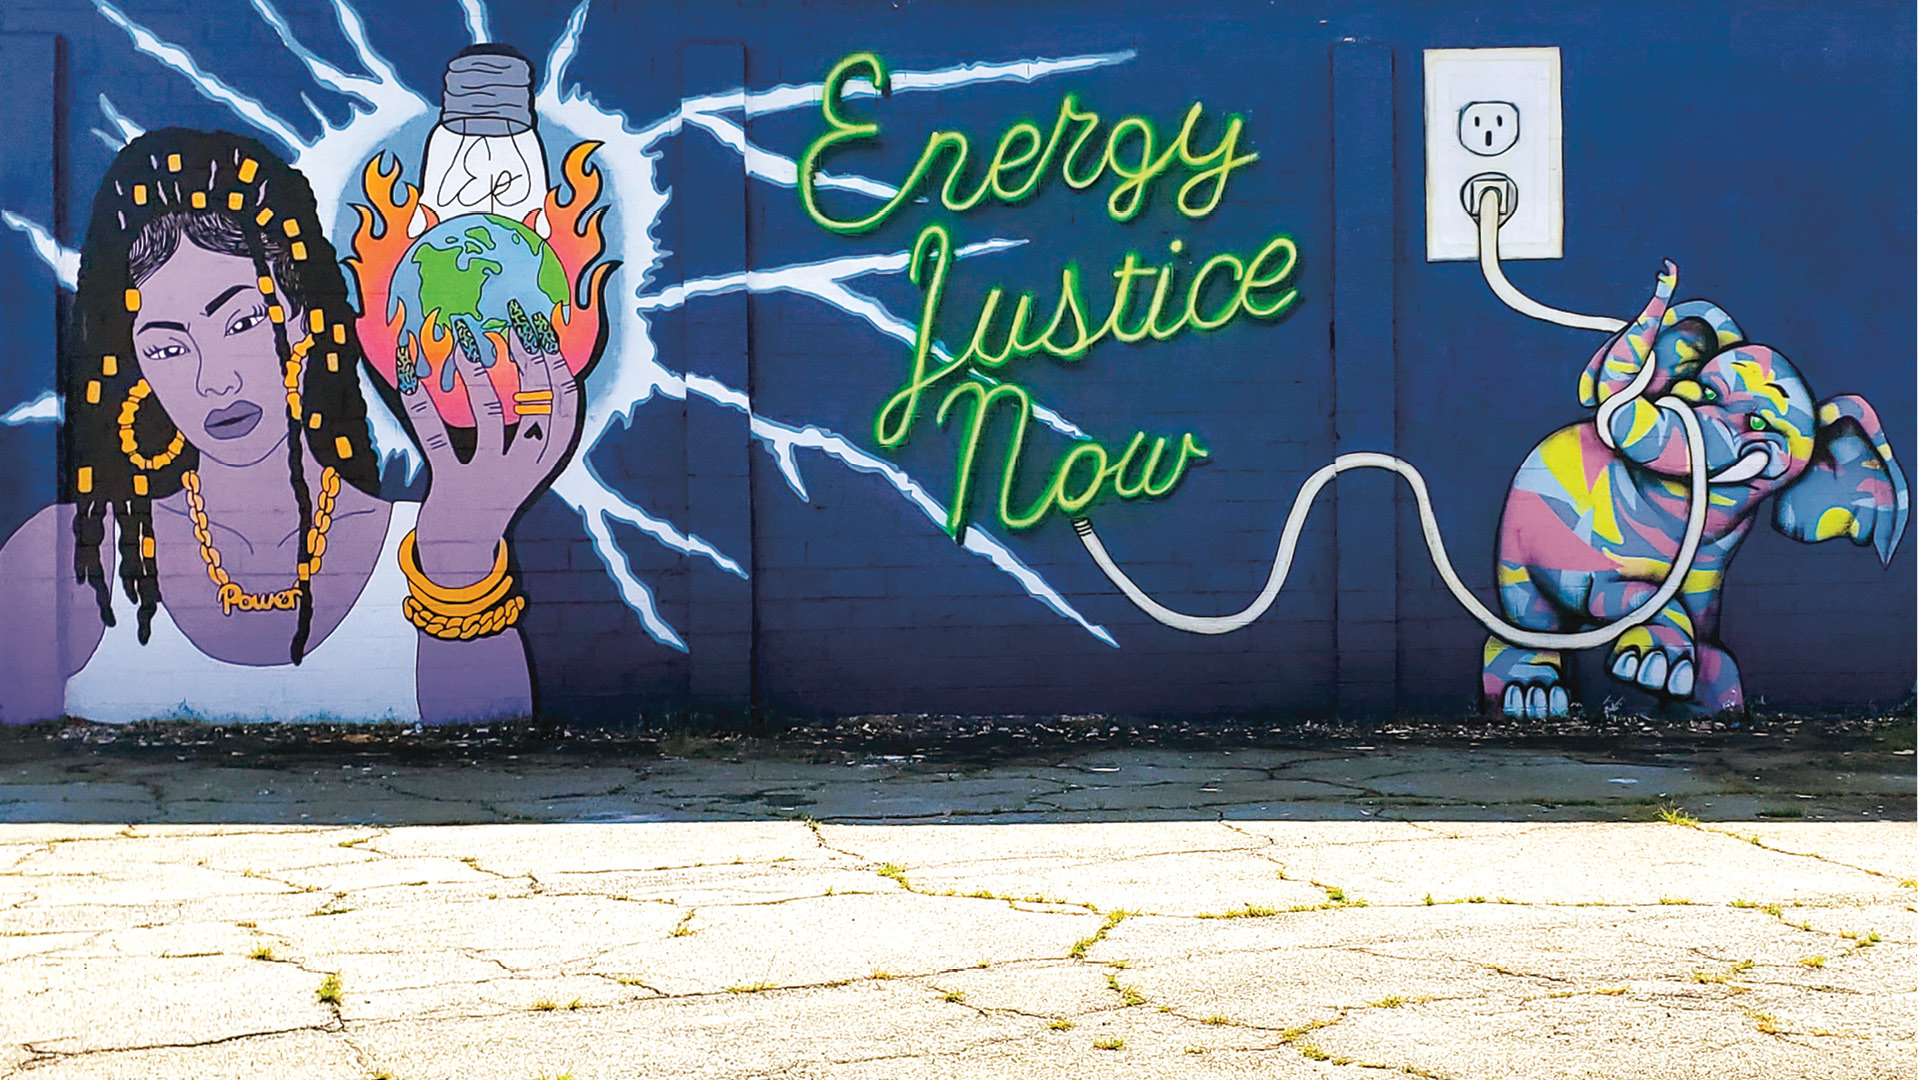 "Energy Justice Now" Mural